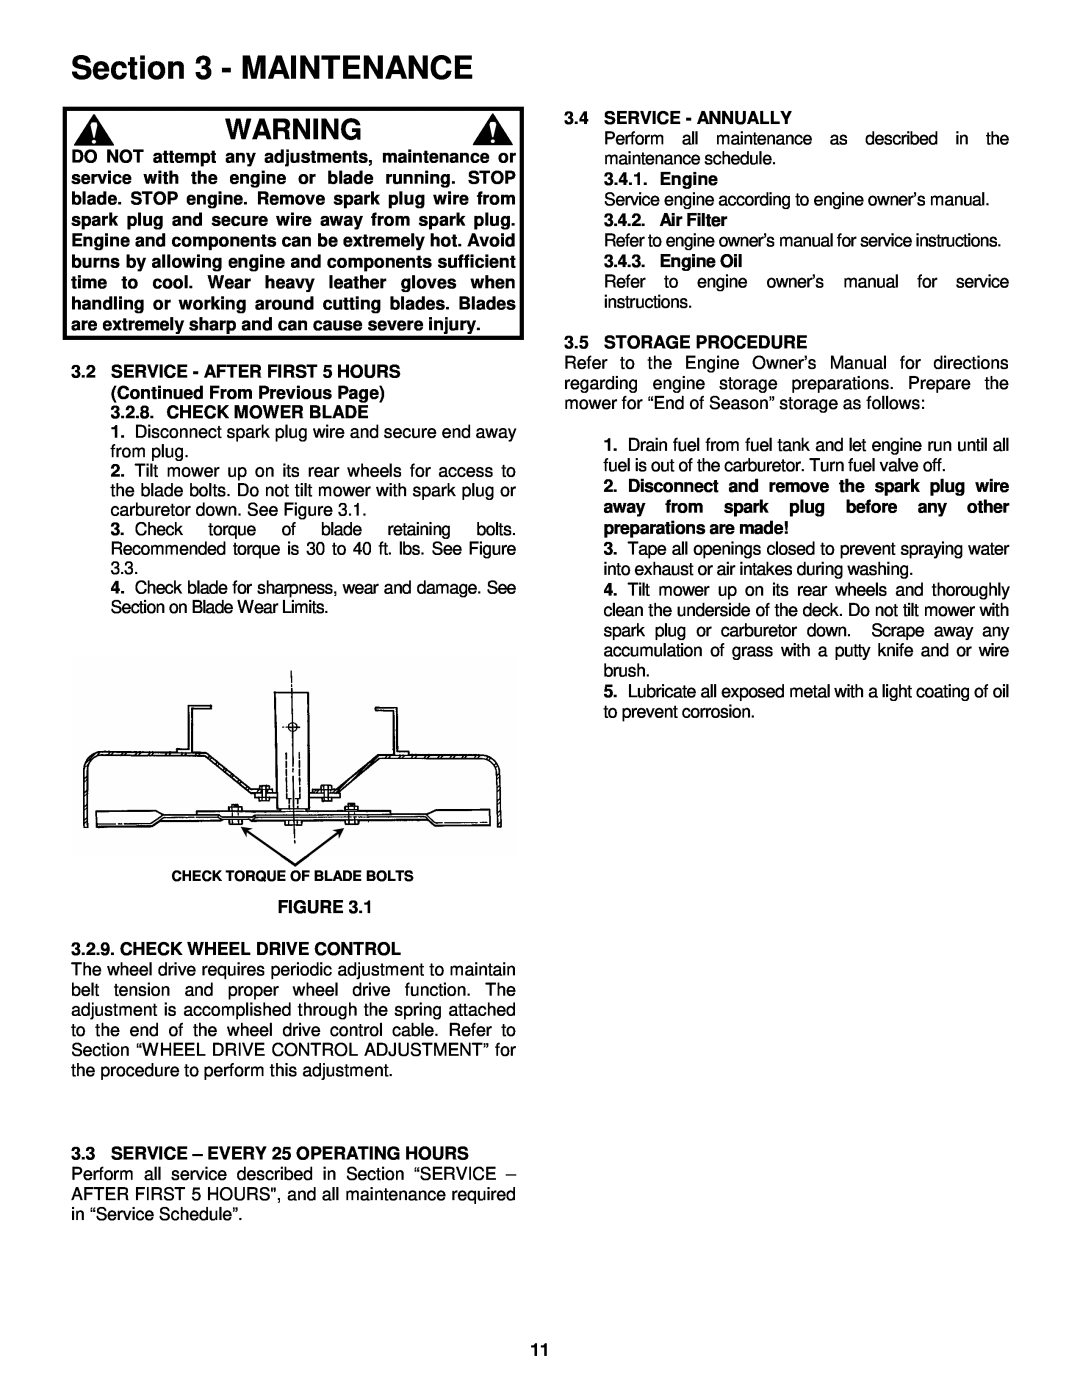 Snapper HWPS26600RV important safety instructions Maintenance, SERVICE - AFTER FIRST 5 HOURS Continued From Previous Page 